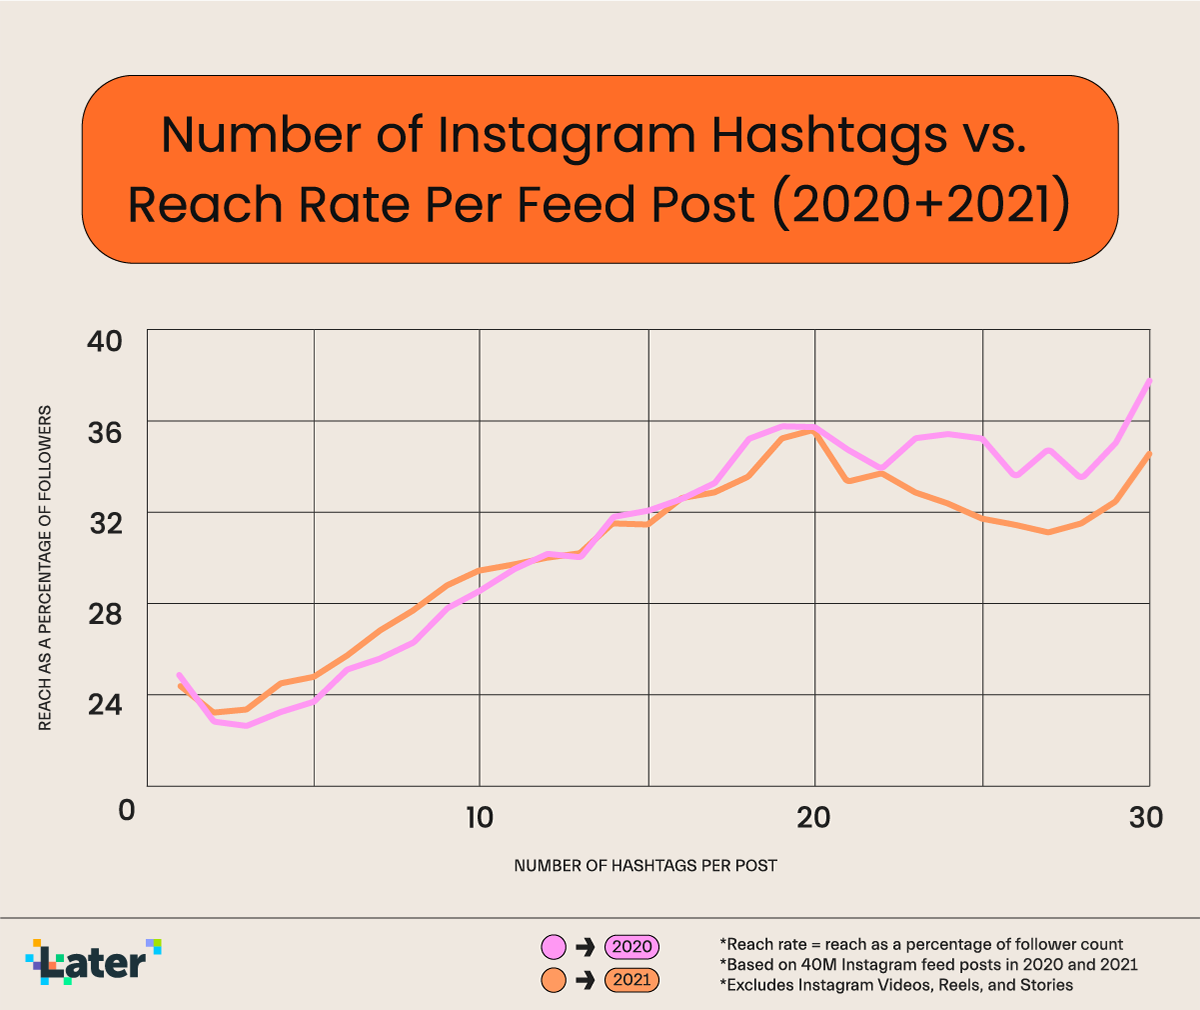 Line graph of Number of Instagram Hashtags vs. Reach Rate Per Feed Post in 2020 and 2021